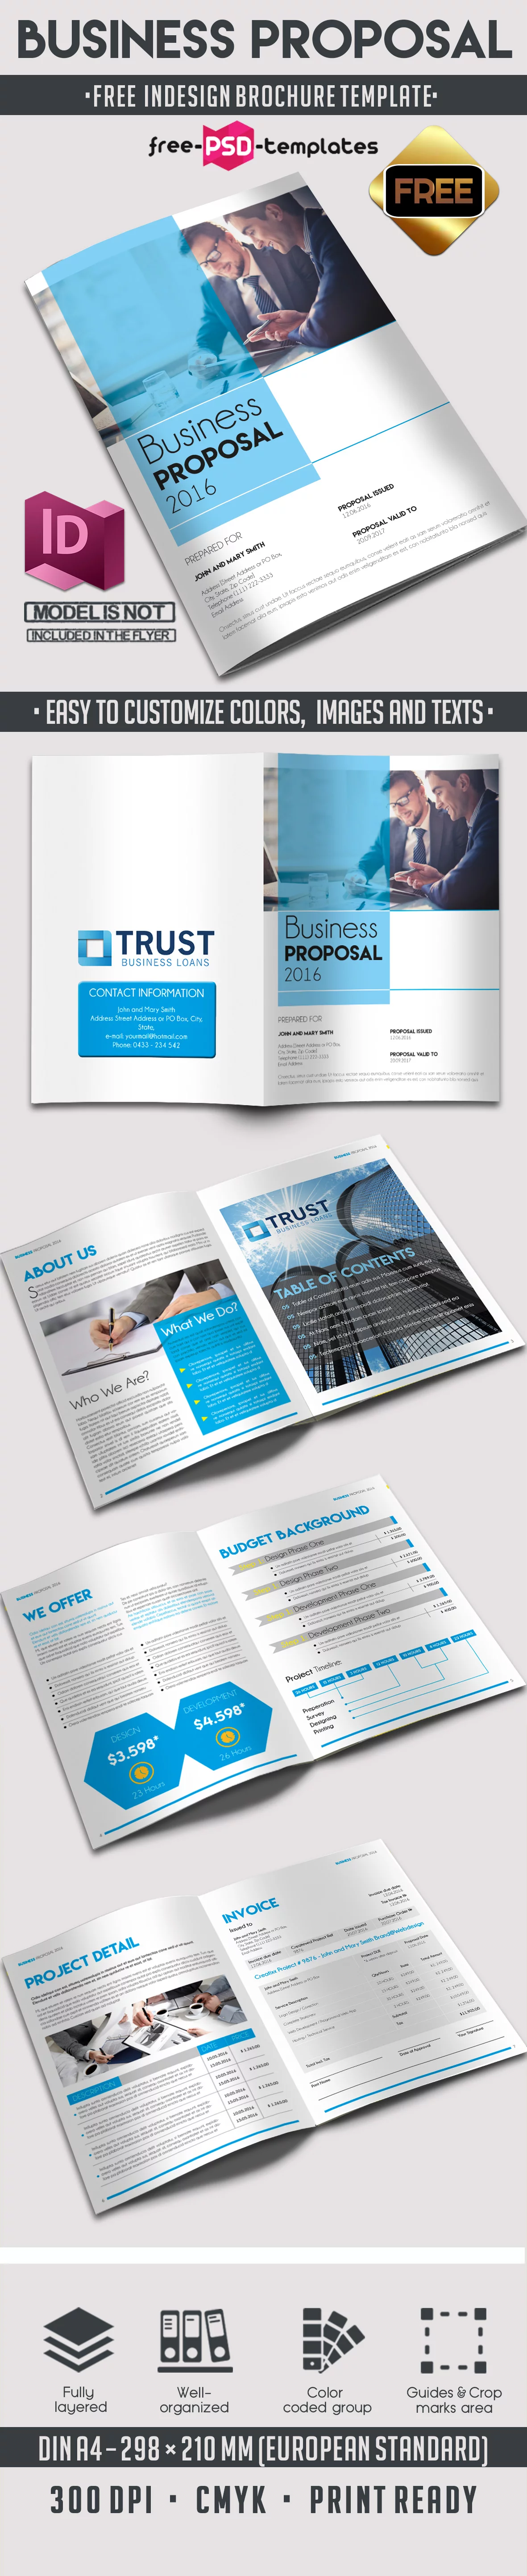 Bigpreview_free-business-proposal-brochure-8-pages-a4